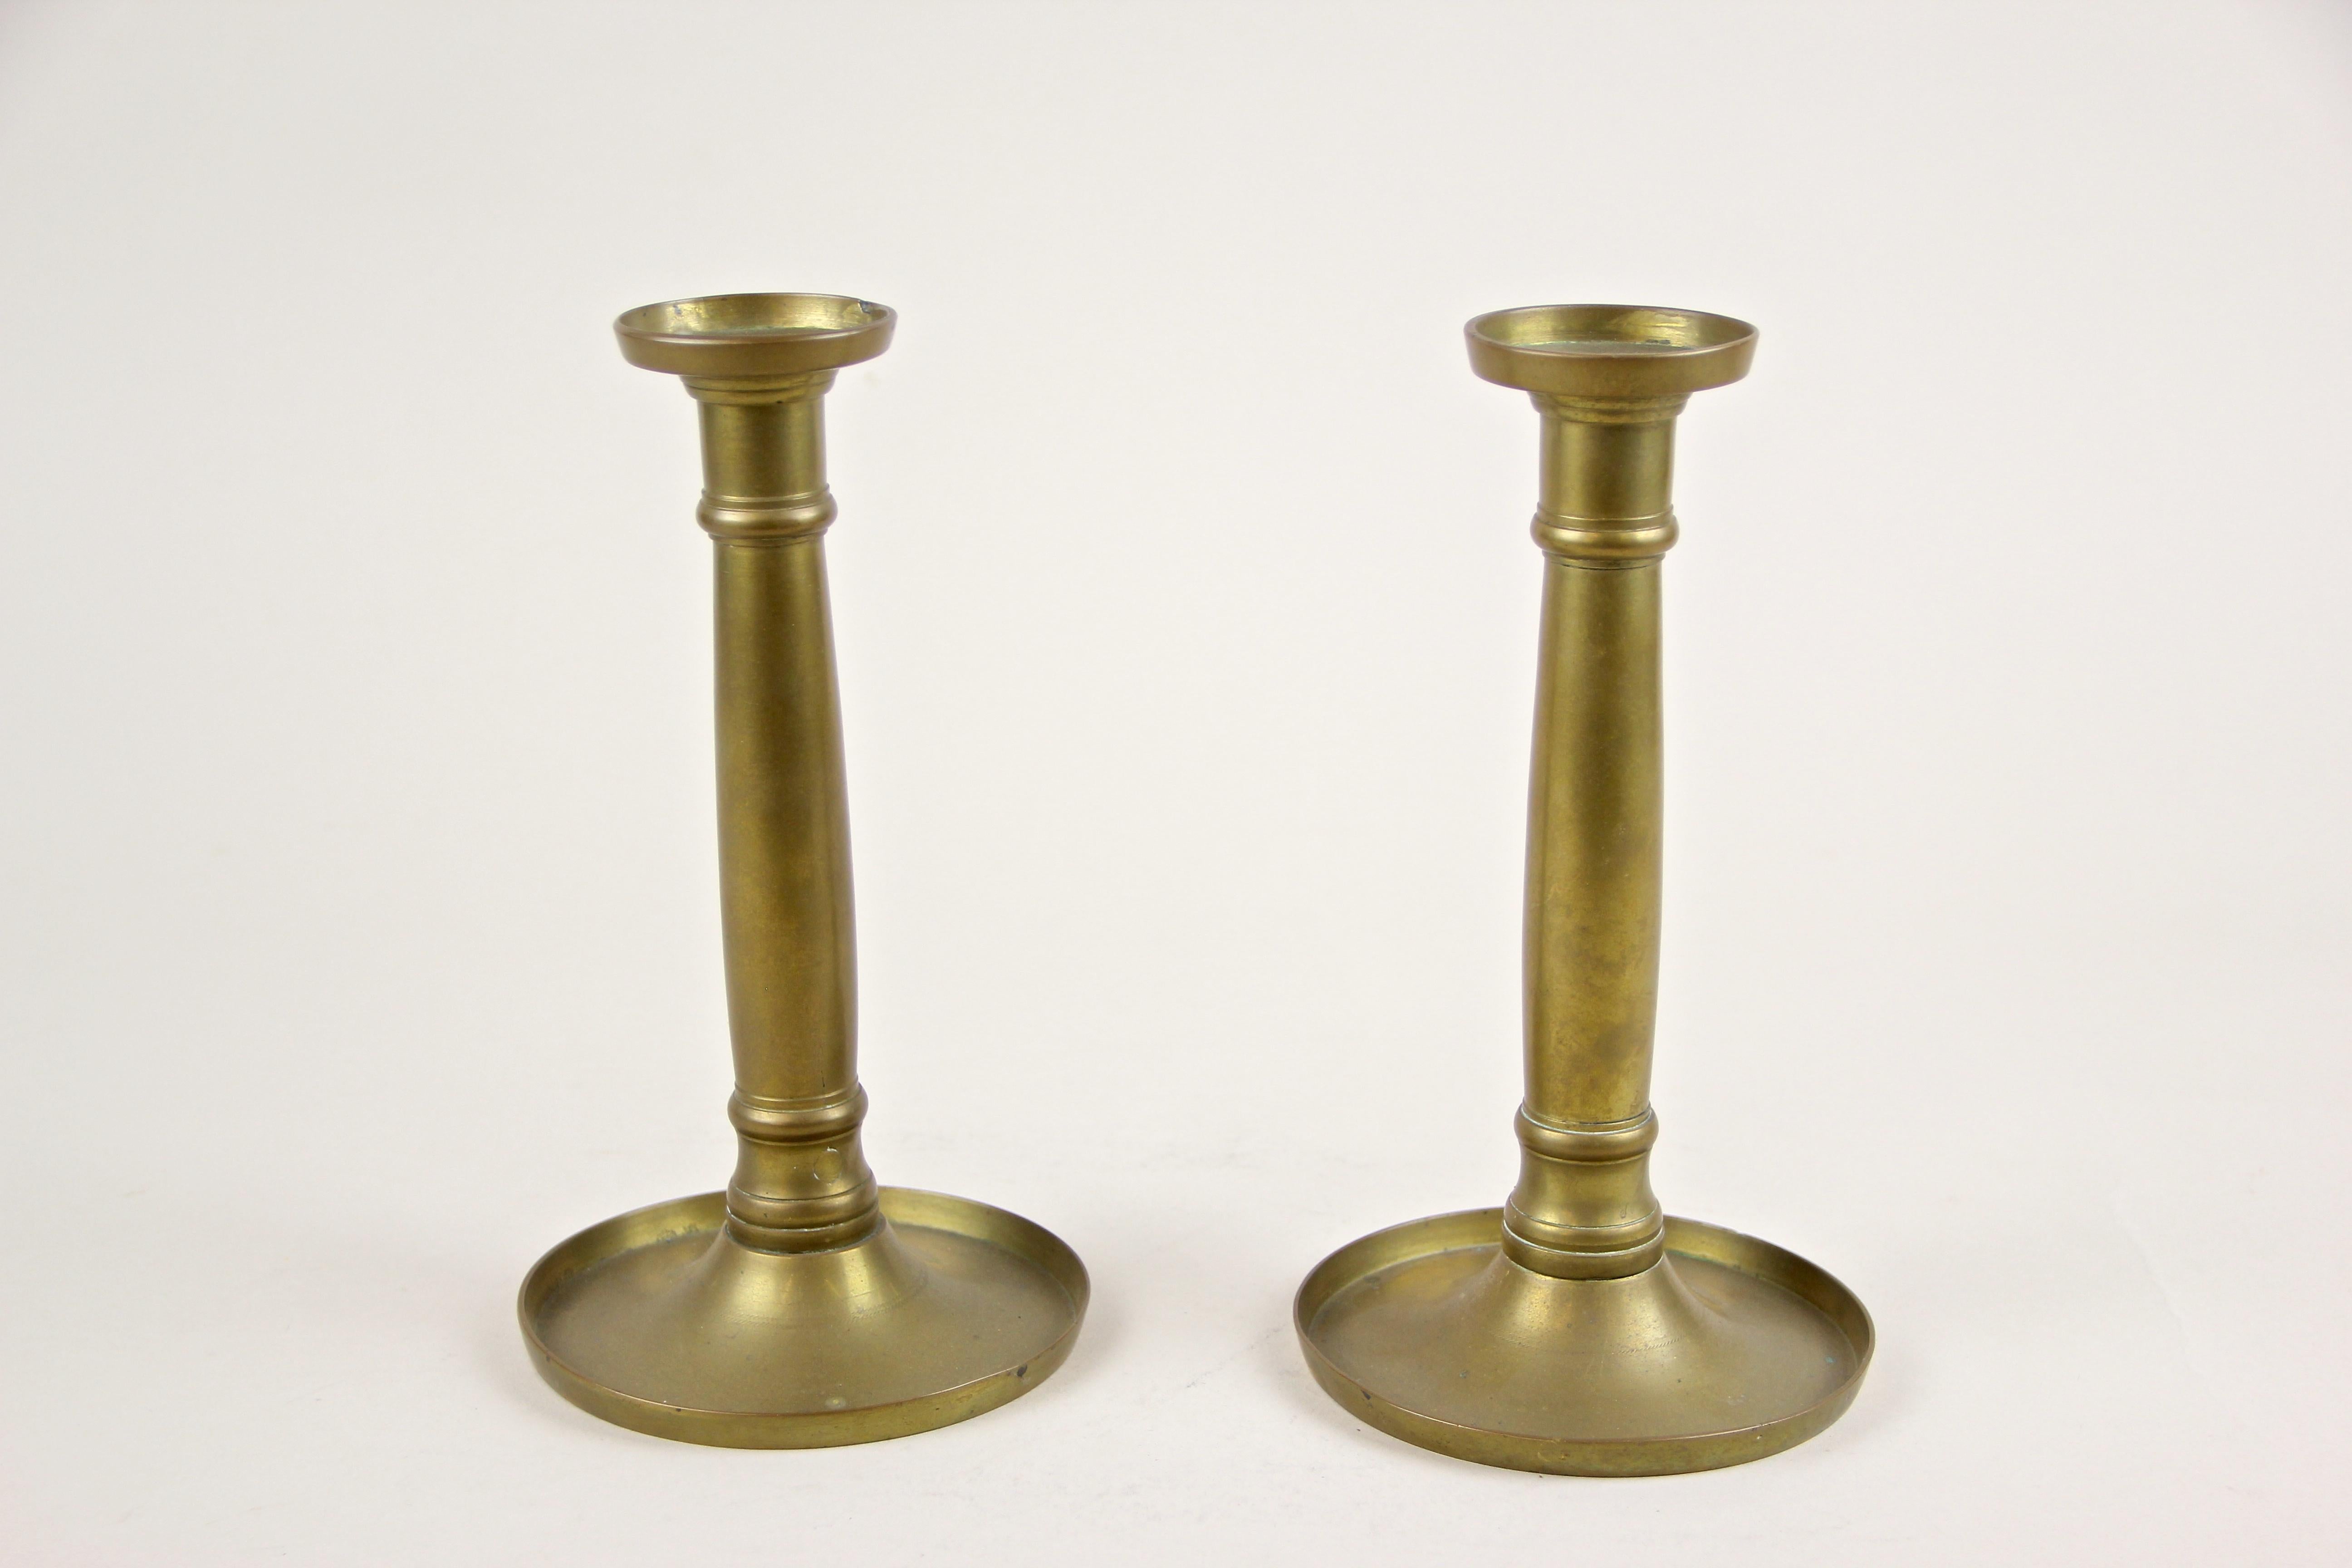 Fine 19th century Biedermeier brass candlesticks from Austria, circa 1830. A straight, clear shape - a typical attribute for the early Bidermeier period - processed of fine brass with details like the filigree chasing on the base (picture #11),